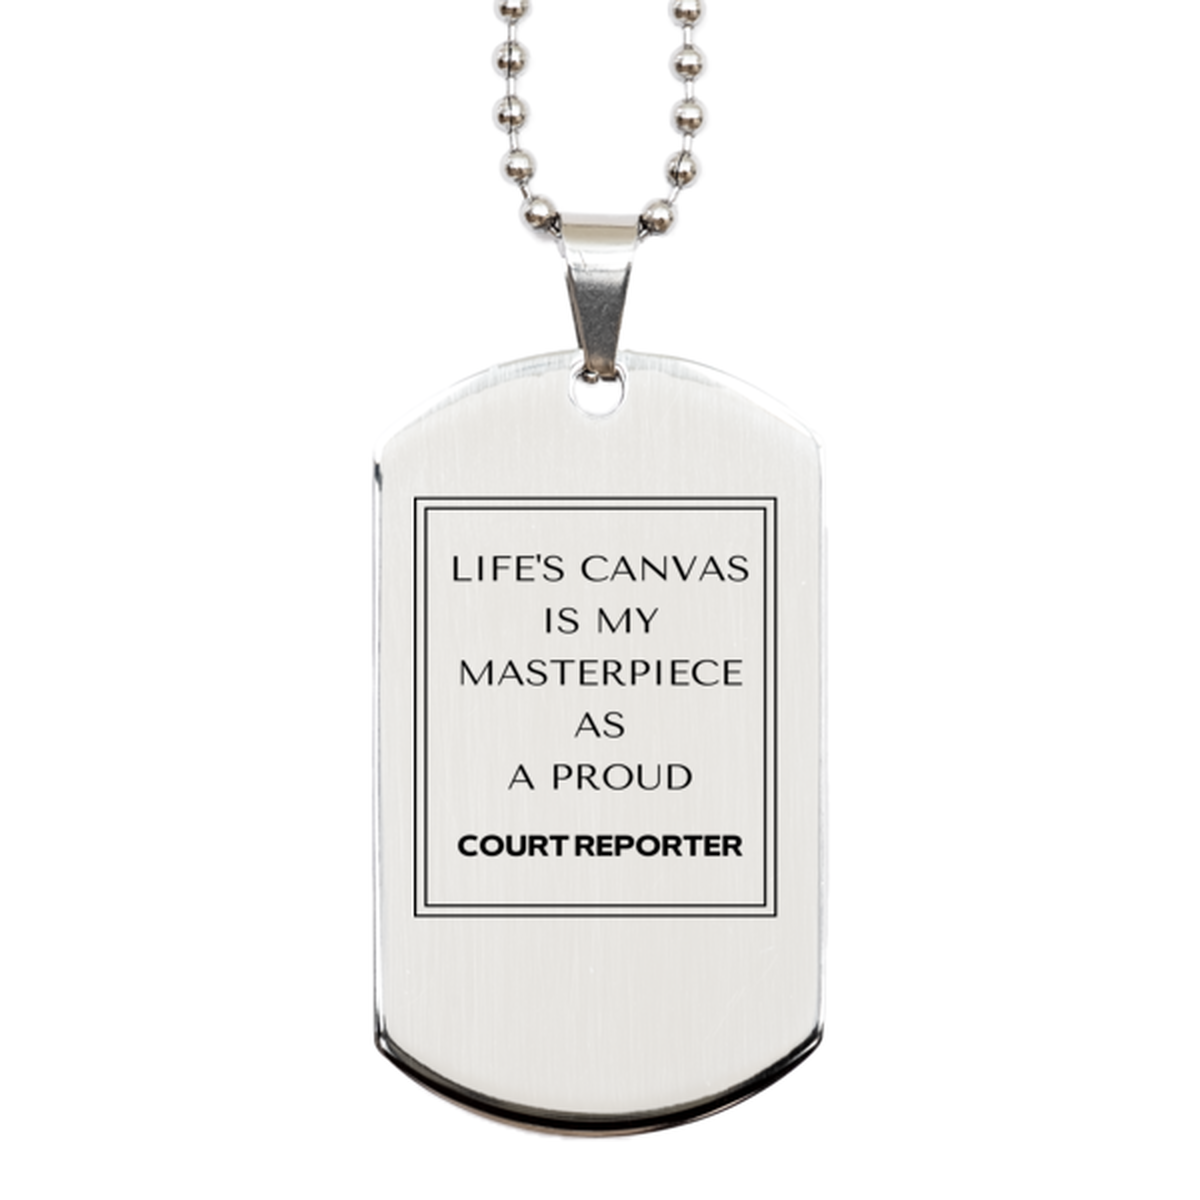 Proud Court Reporter Gifts, Life's canvas is my masterpiece, Epic Birthday Christmas Unique Silver Dog Tag For Court Reporter, Coworkers, Men, Women, Friends